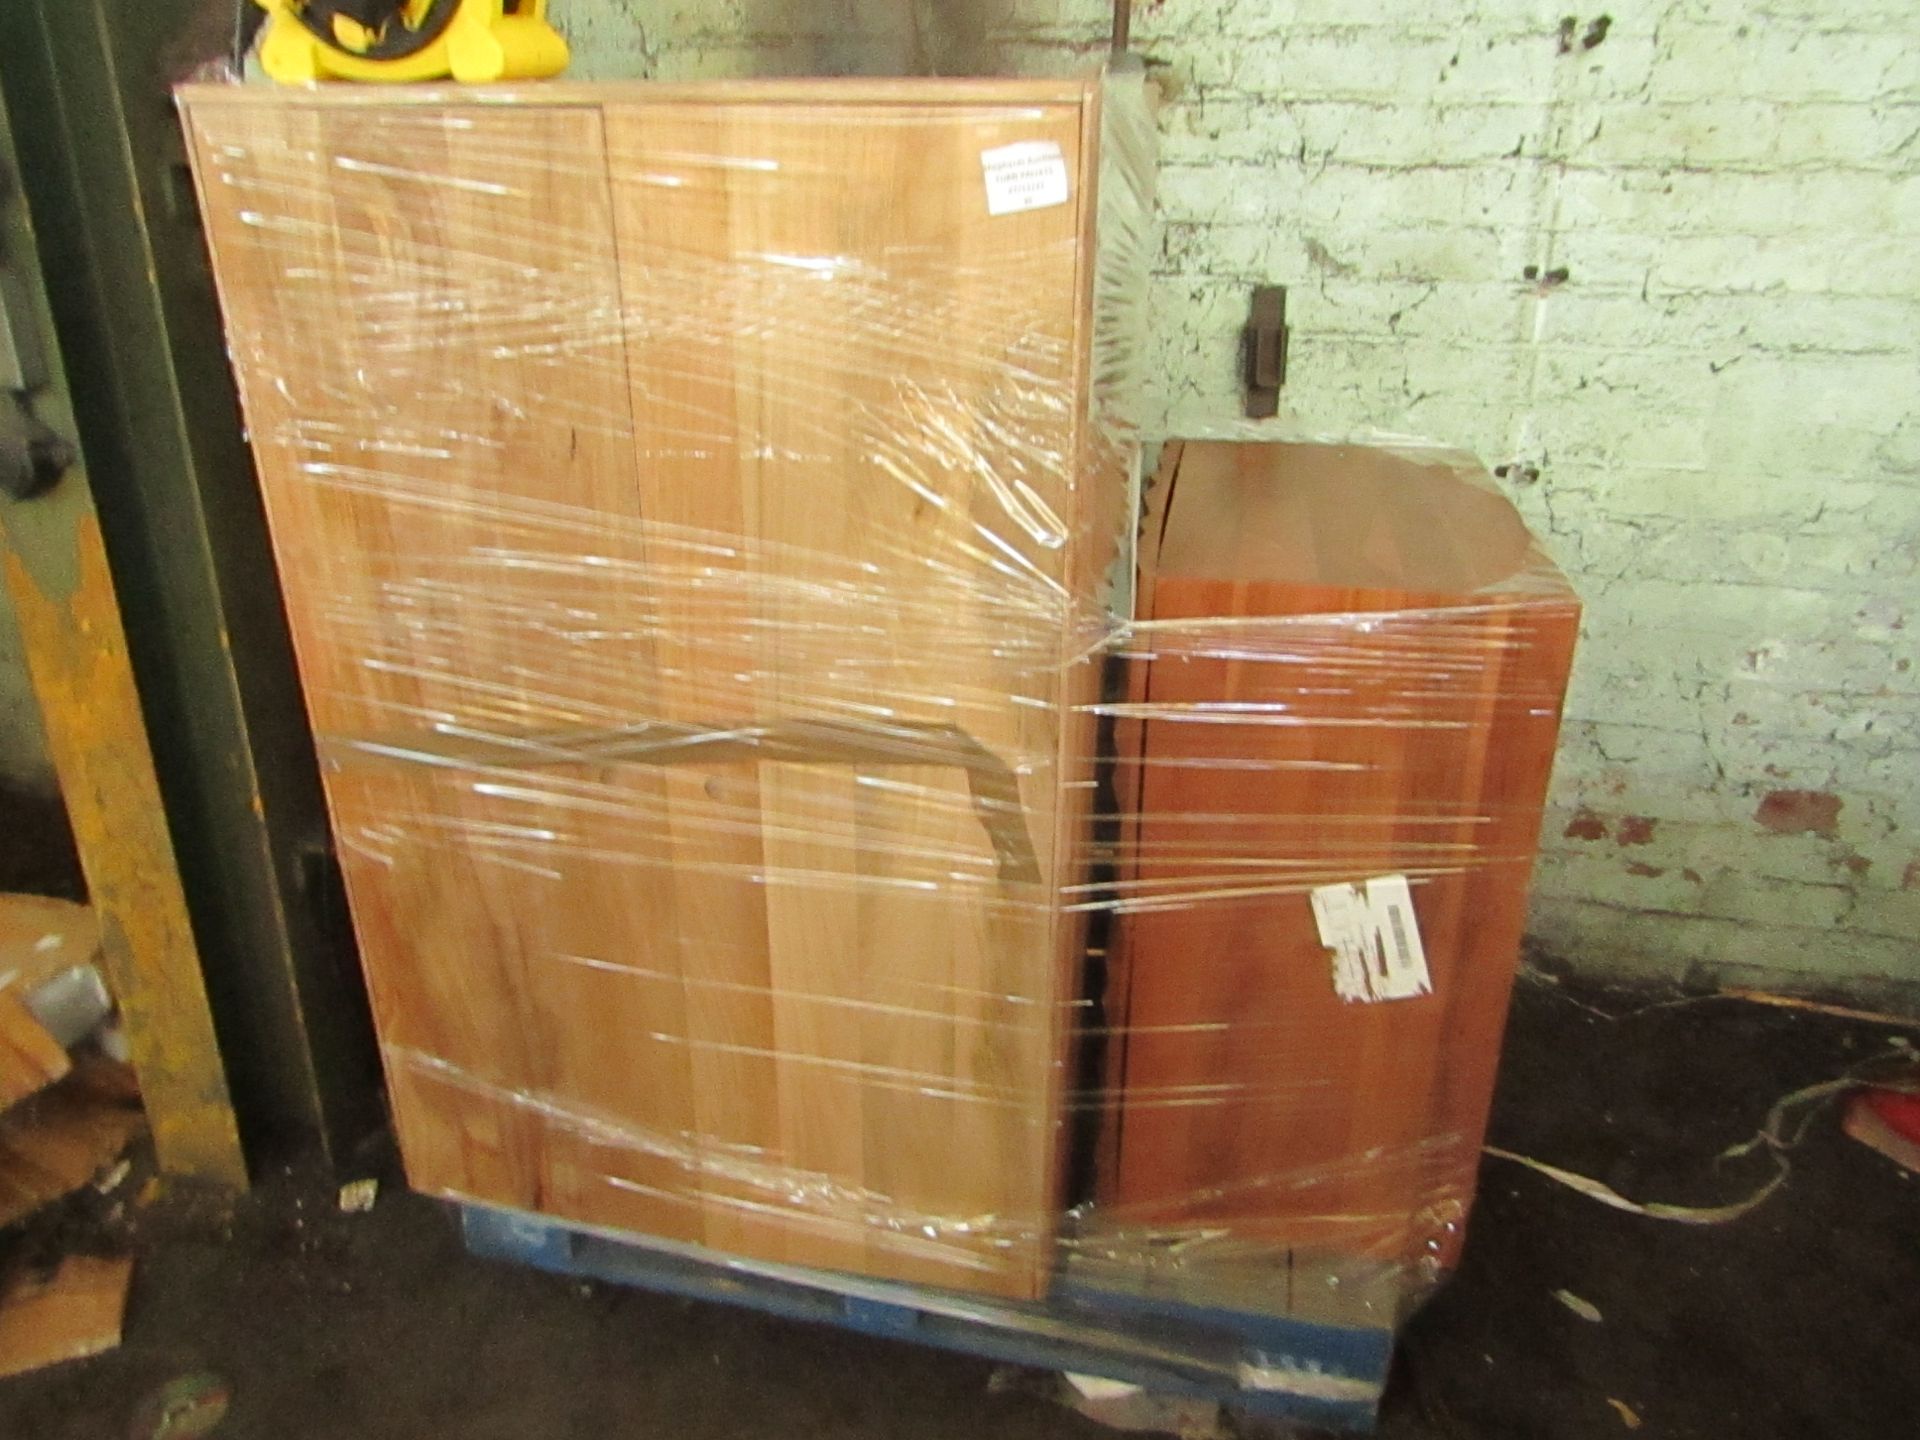 | 1X | PALLET OF FAULTY / MISSING PARTS / DAMAGED CUSTOMER RETURNS SWOON STOCK UNMANIFESTED | PALLET